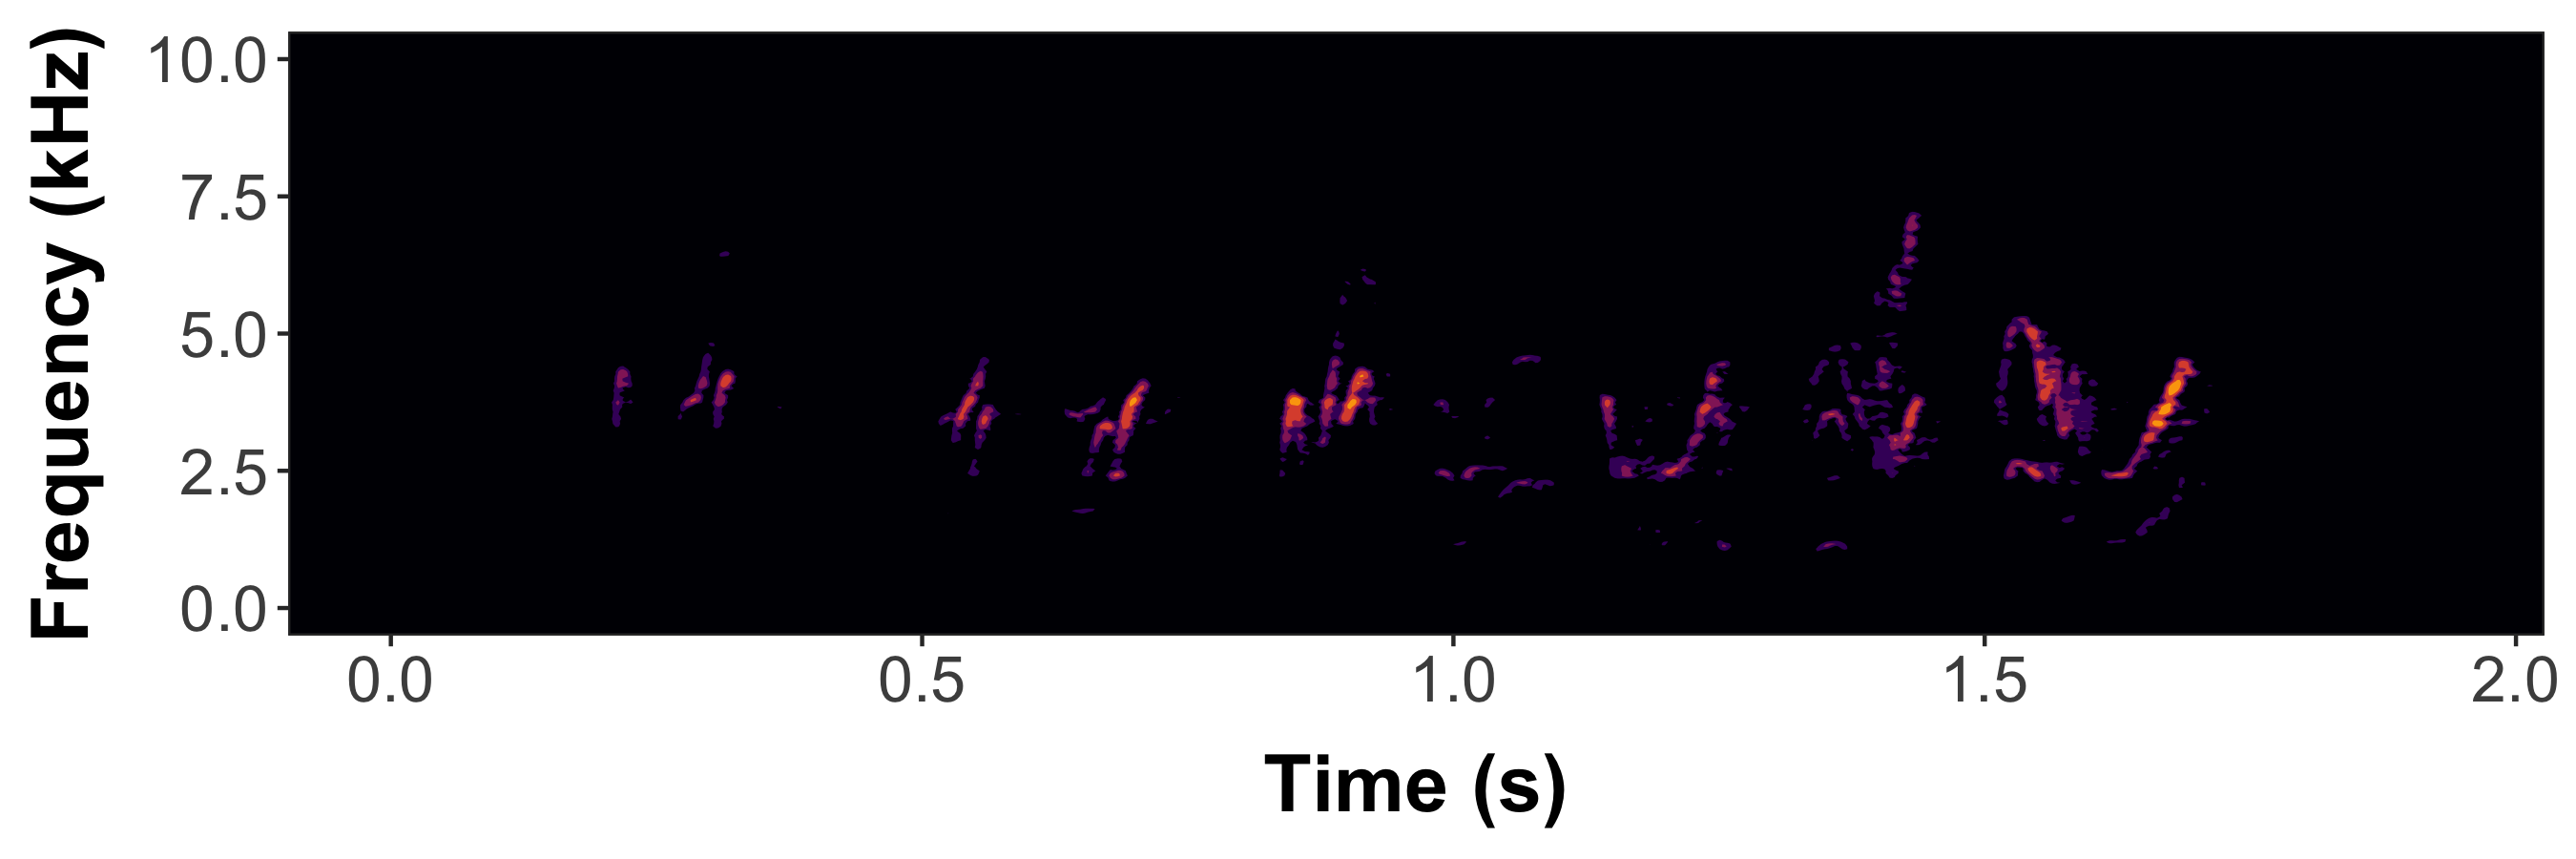 Static spectrogram with axis labels for female barn swallow song